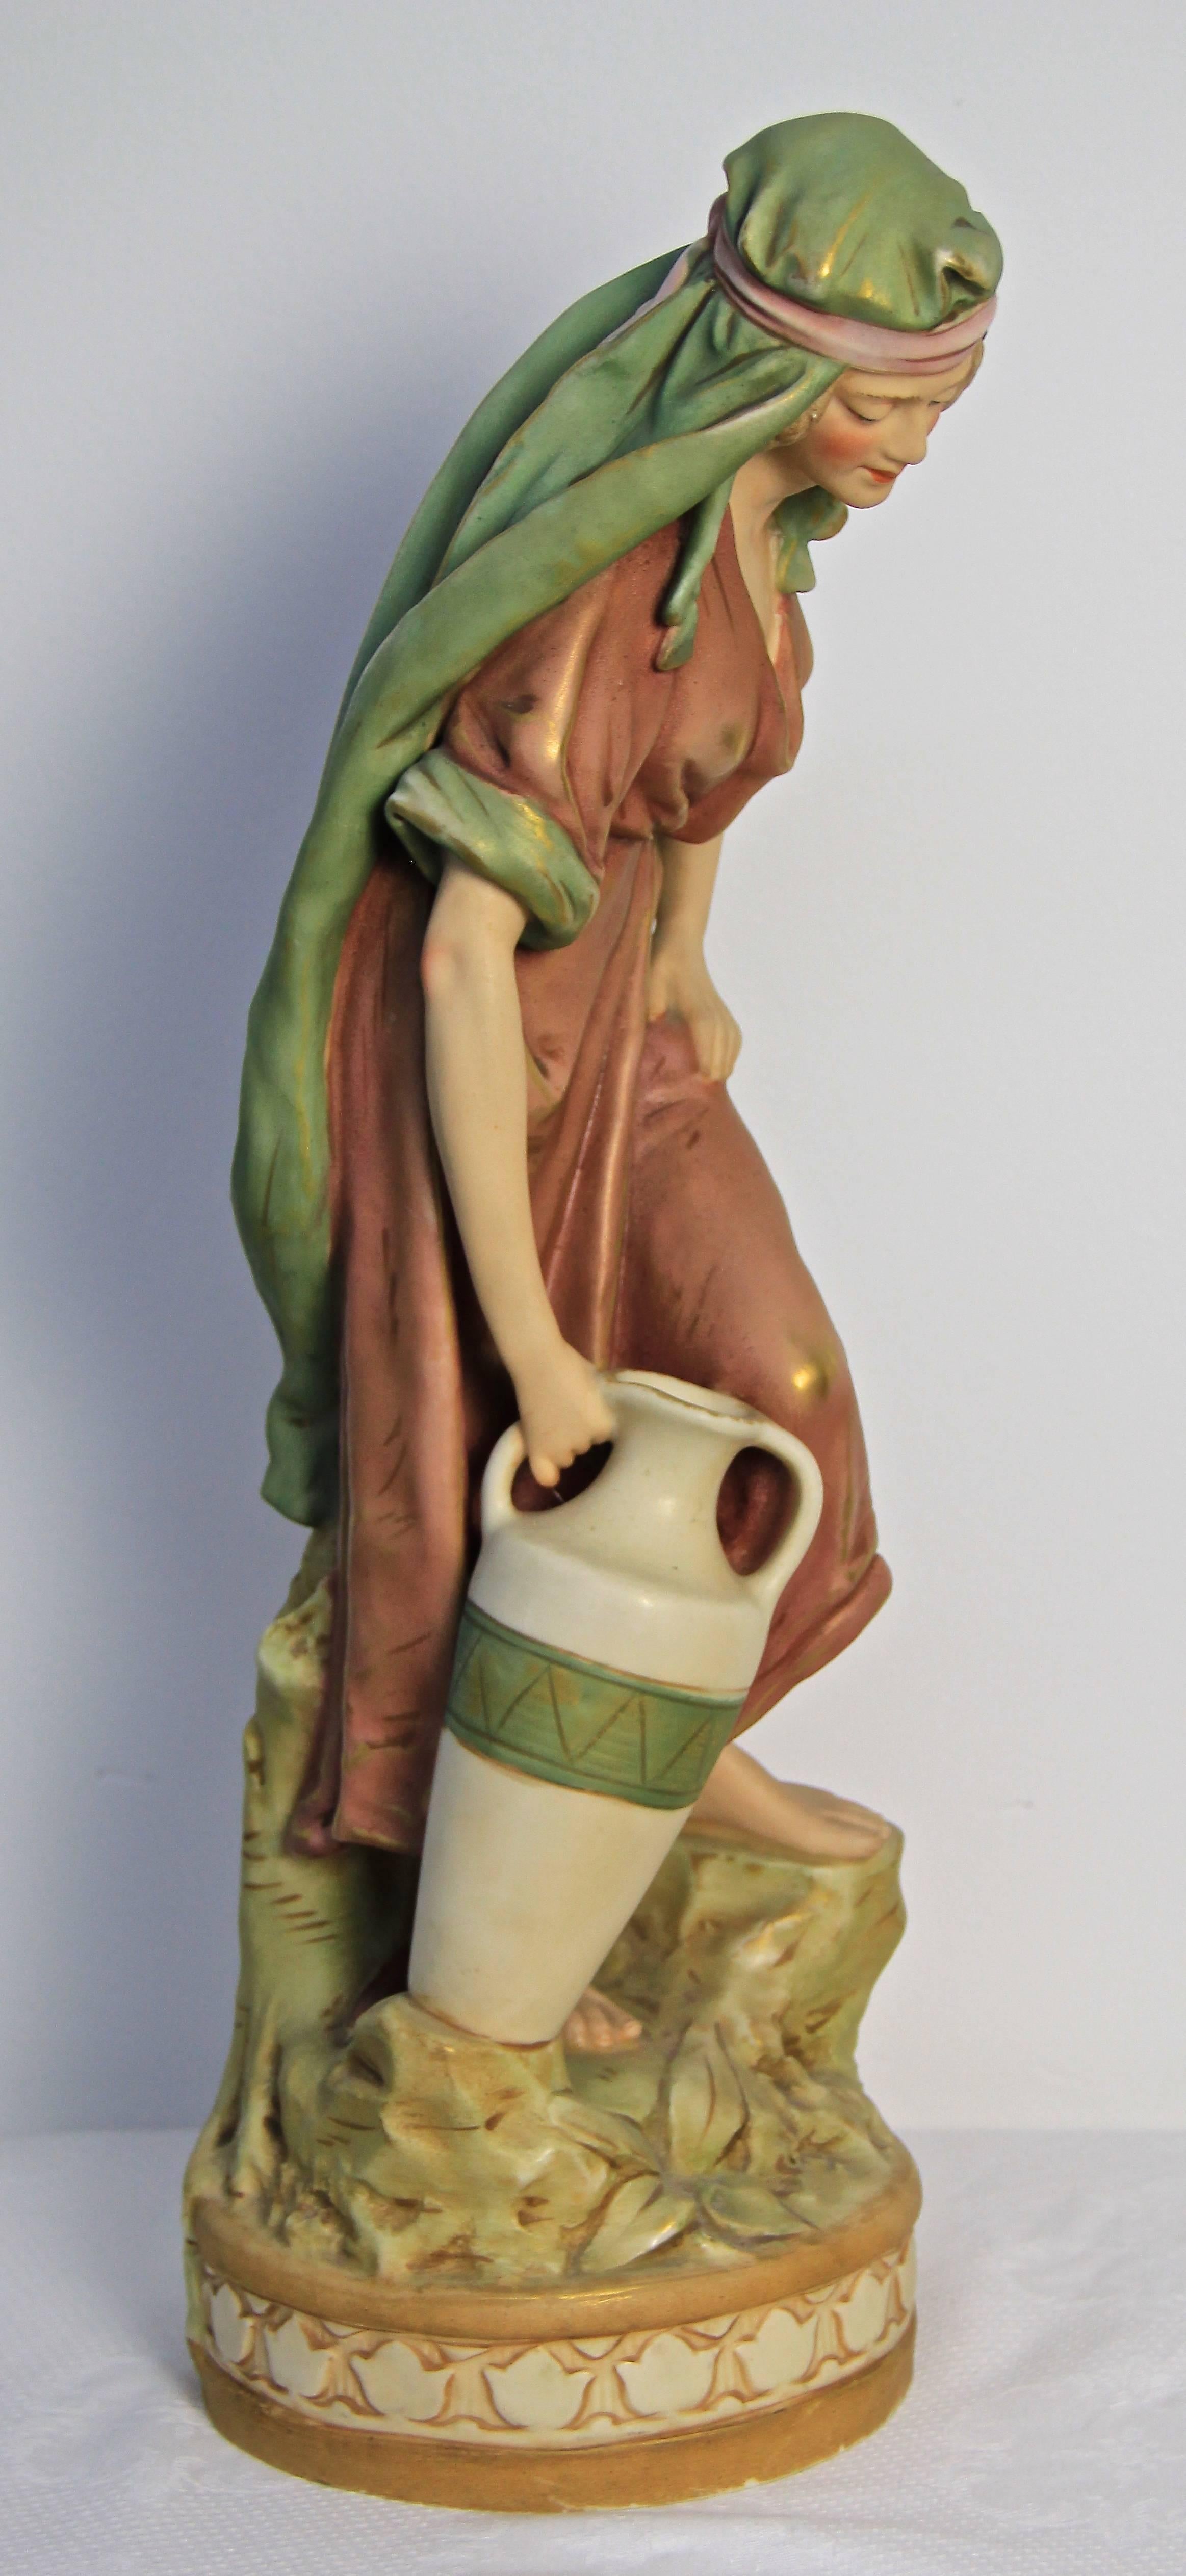 This beautiful Art Nouveau figure, coming from the Czech Republic back in 1910, was made of fine porcelain and is hallmarked with the 